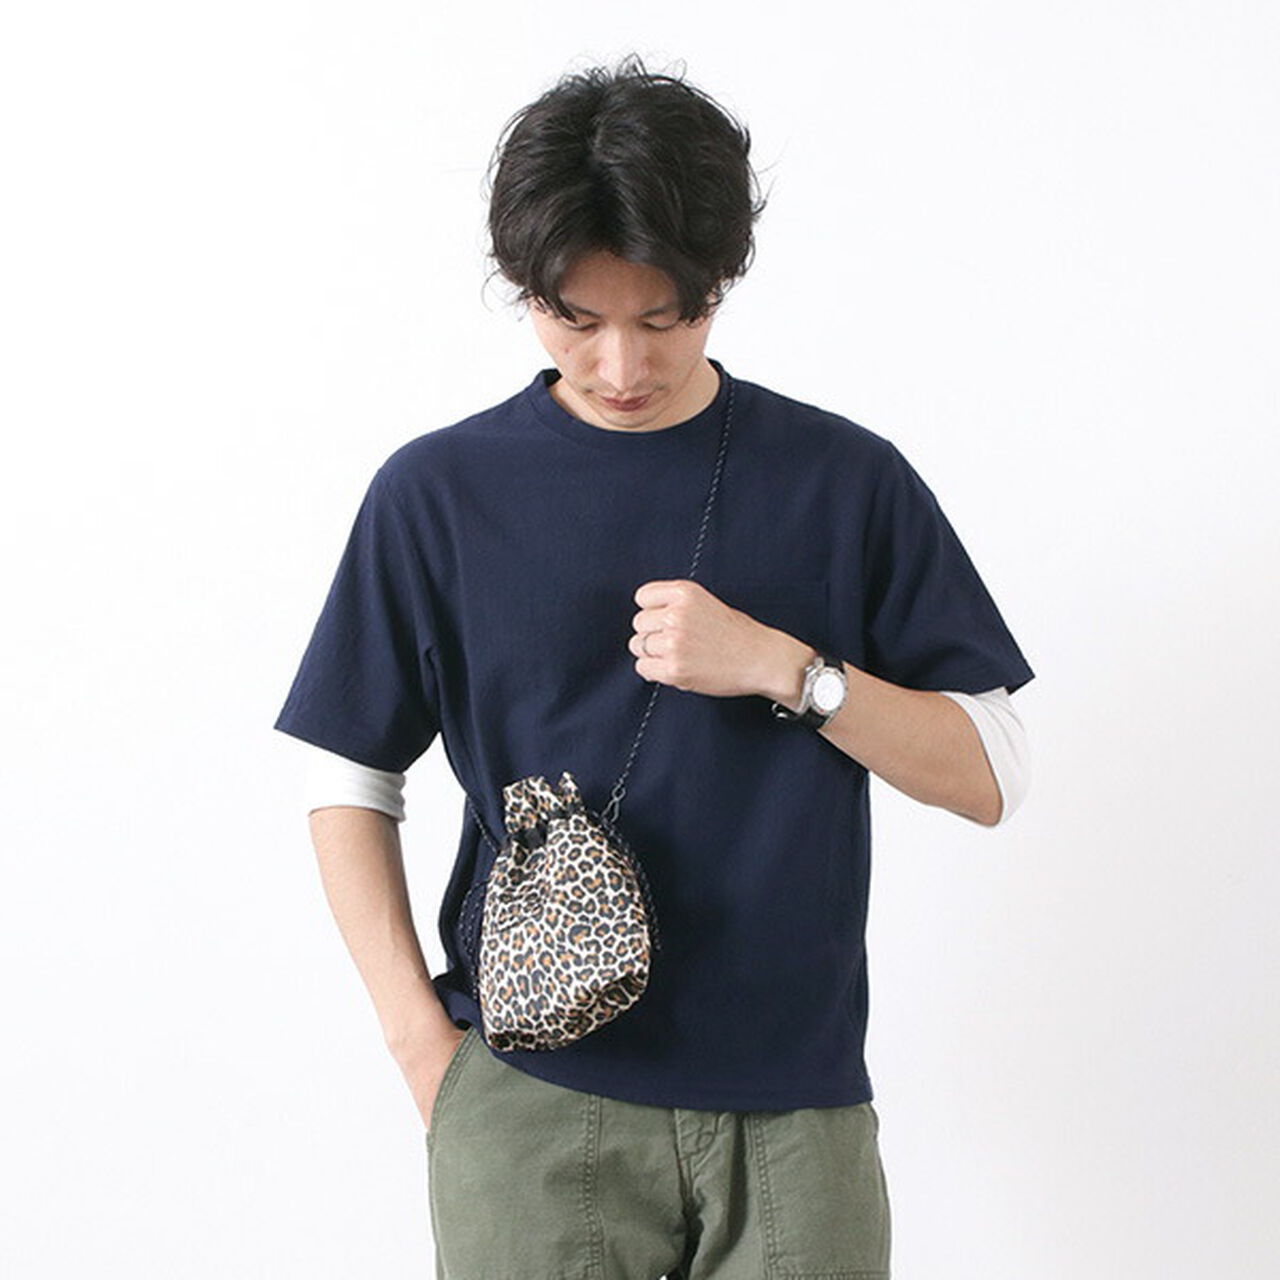 Leopard Pinion Pouch,Multi, large image number 0